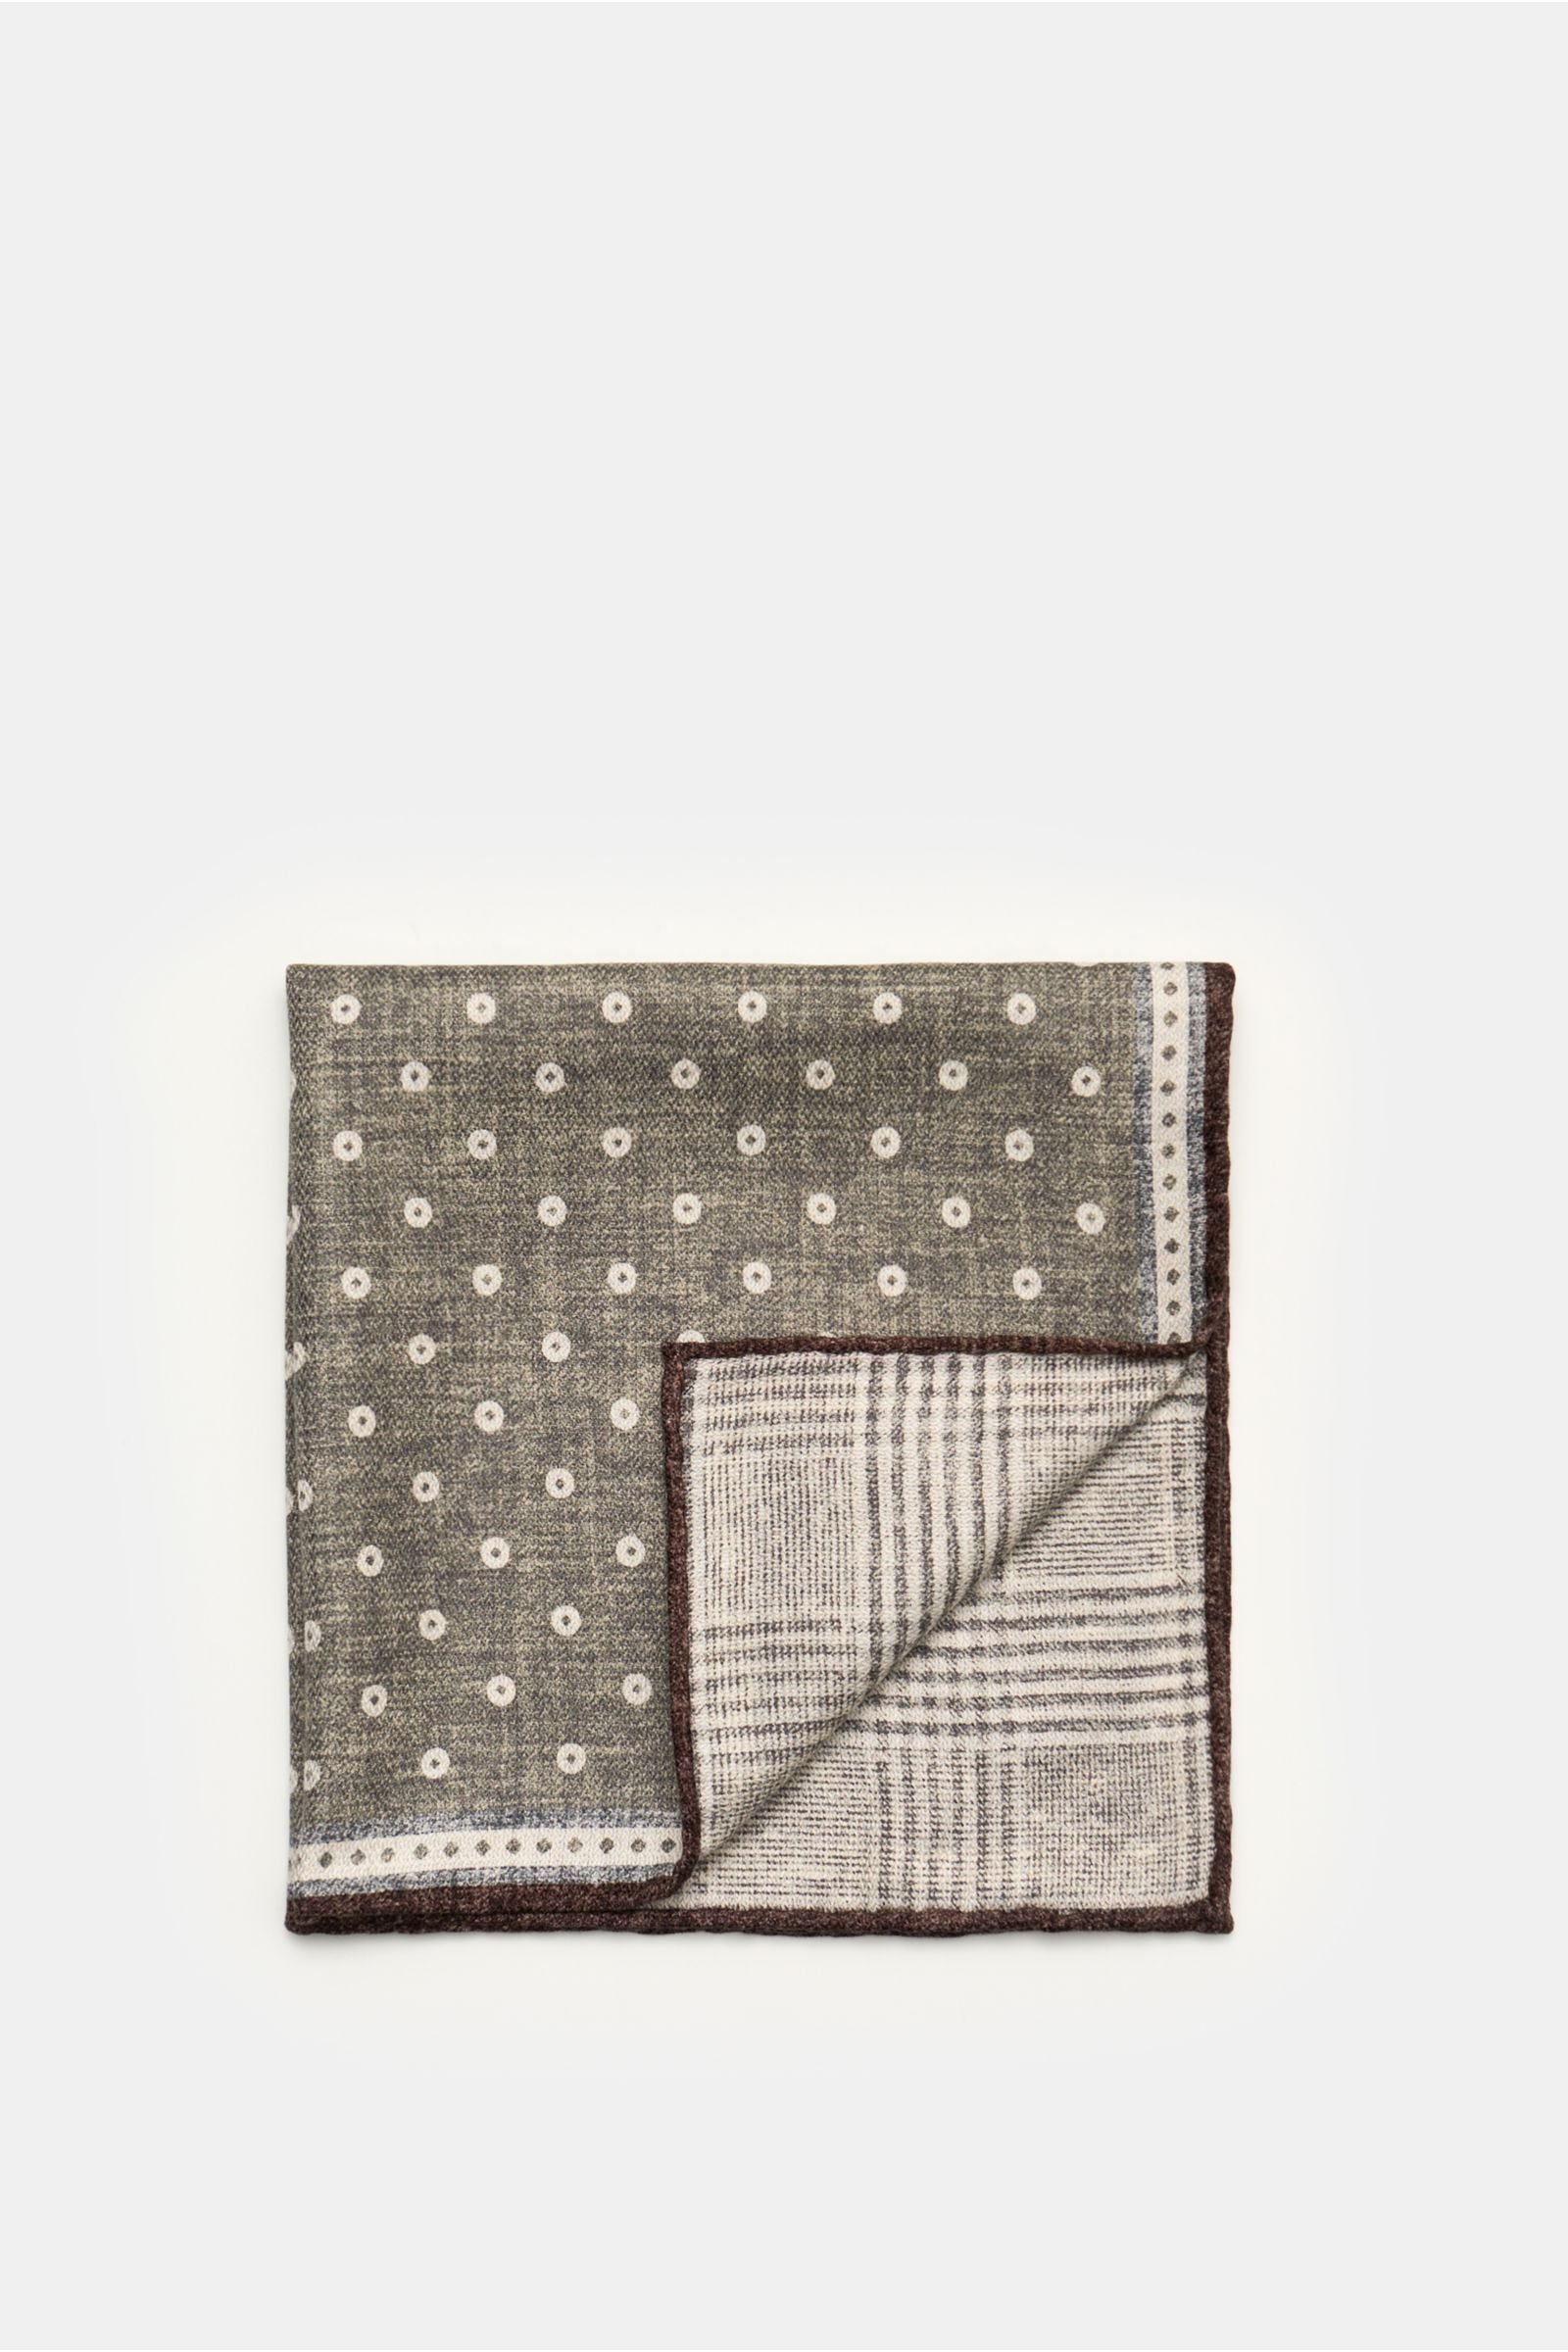 Pocket square grey/cream dotted